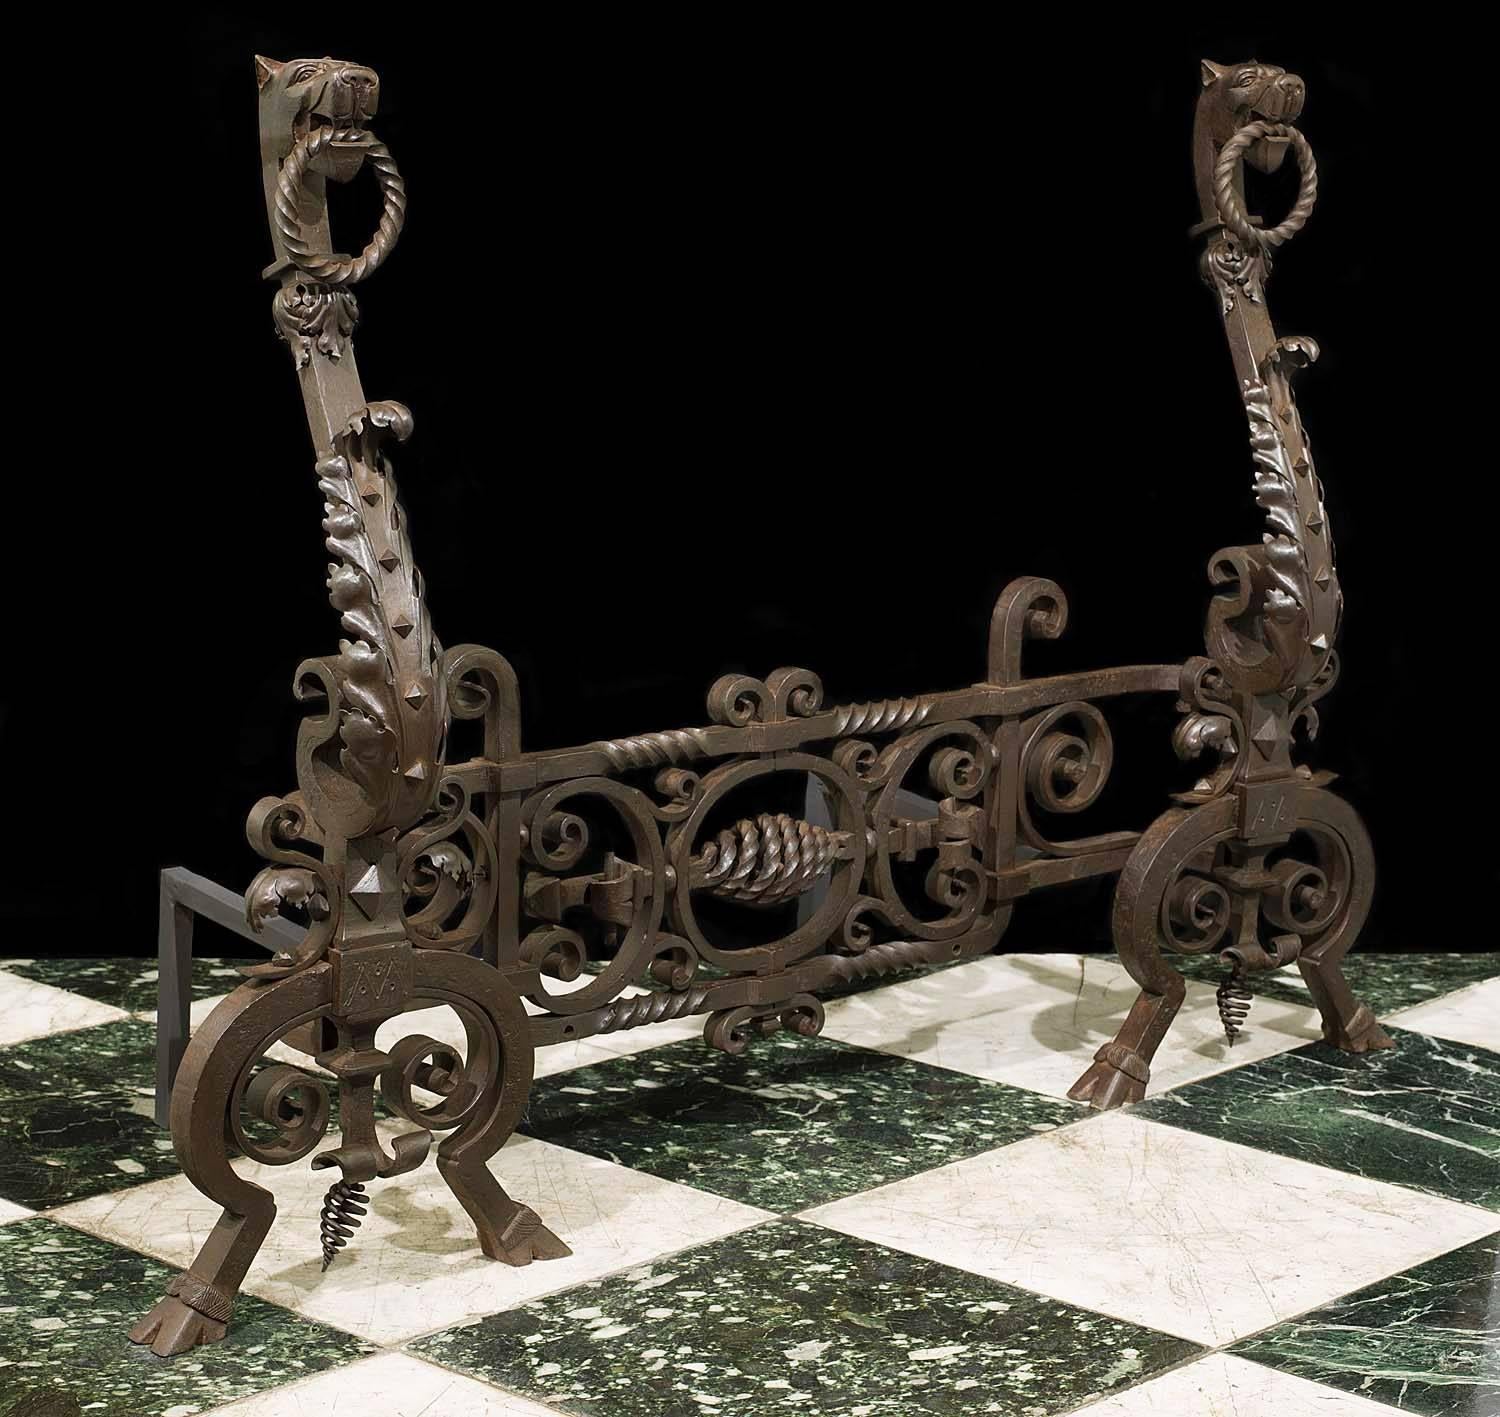 A pair of substantial Jacobean style wrought iron andirons linked by a highly ornate scrolled fender bar. The standards in the form of a pair of griffins holding rings in their mouths,
English, late 19th century. 

(Price and vat in EU zone).